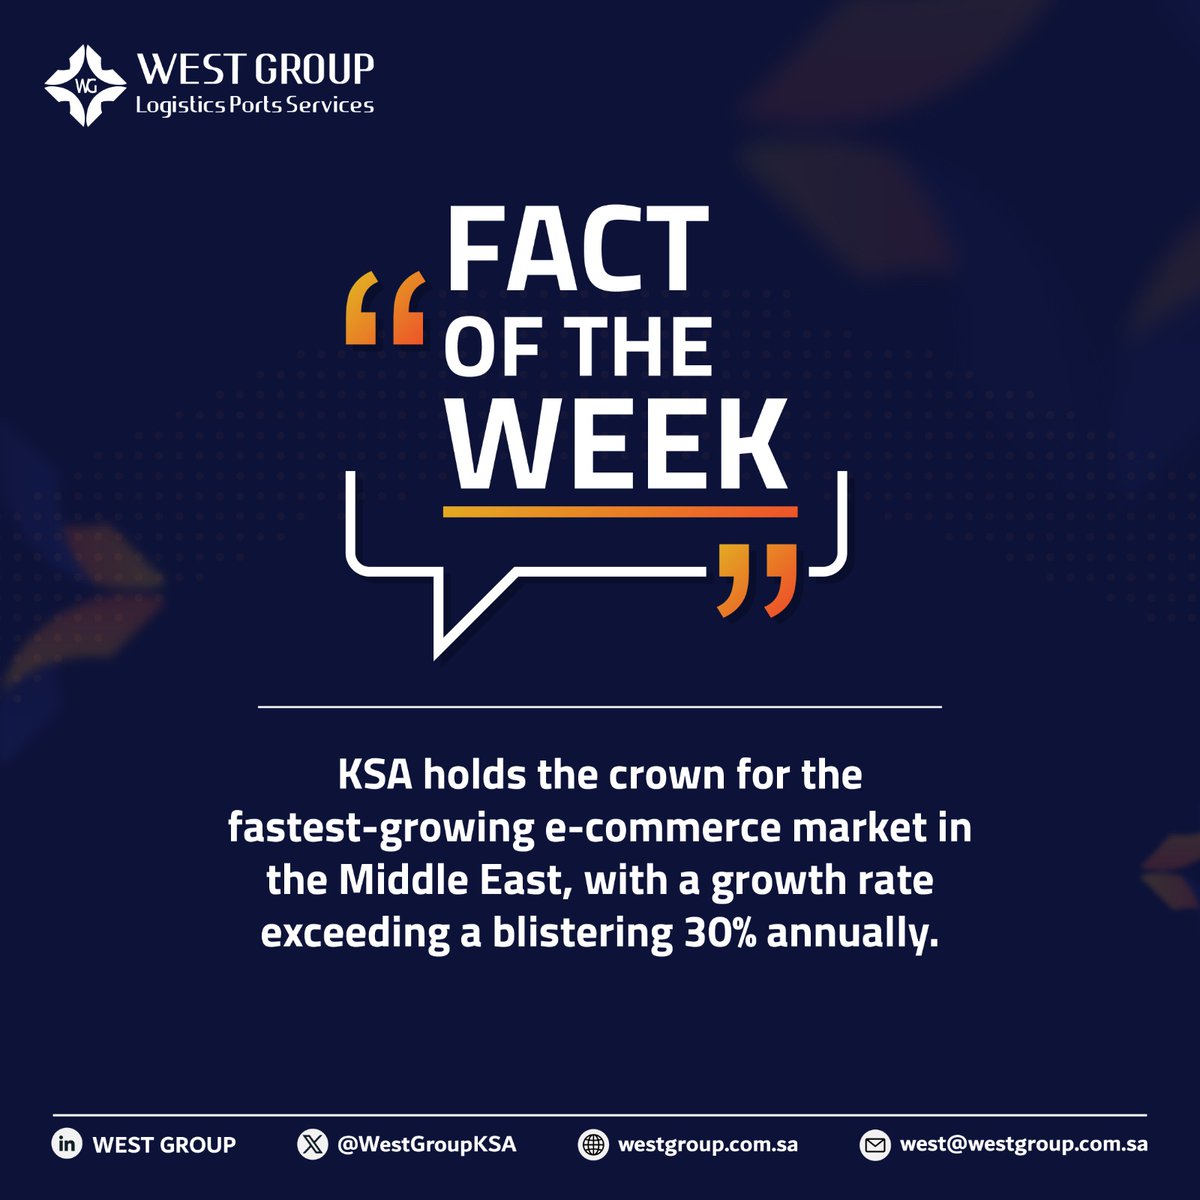 Learning something new with our #FactOfTheWeek!